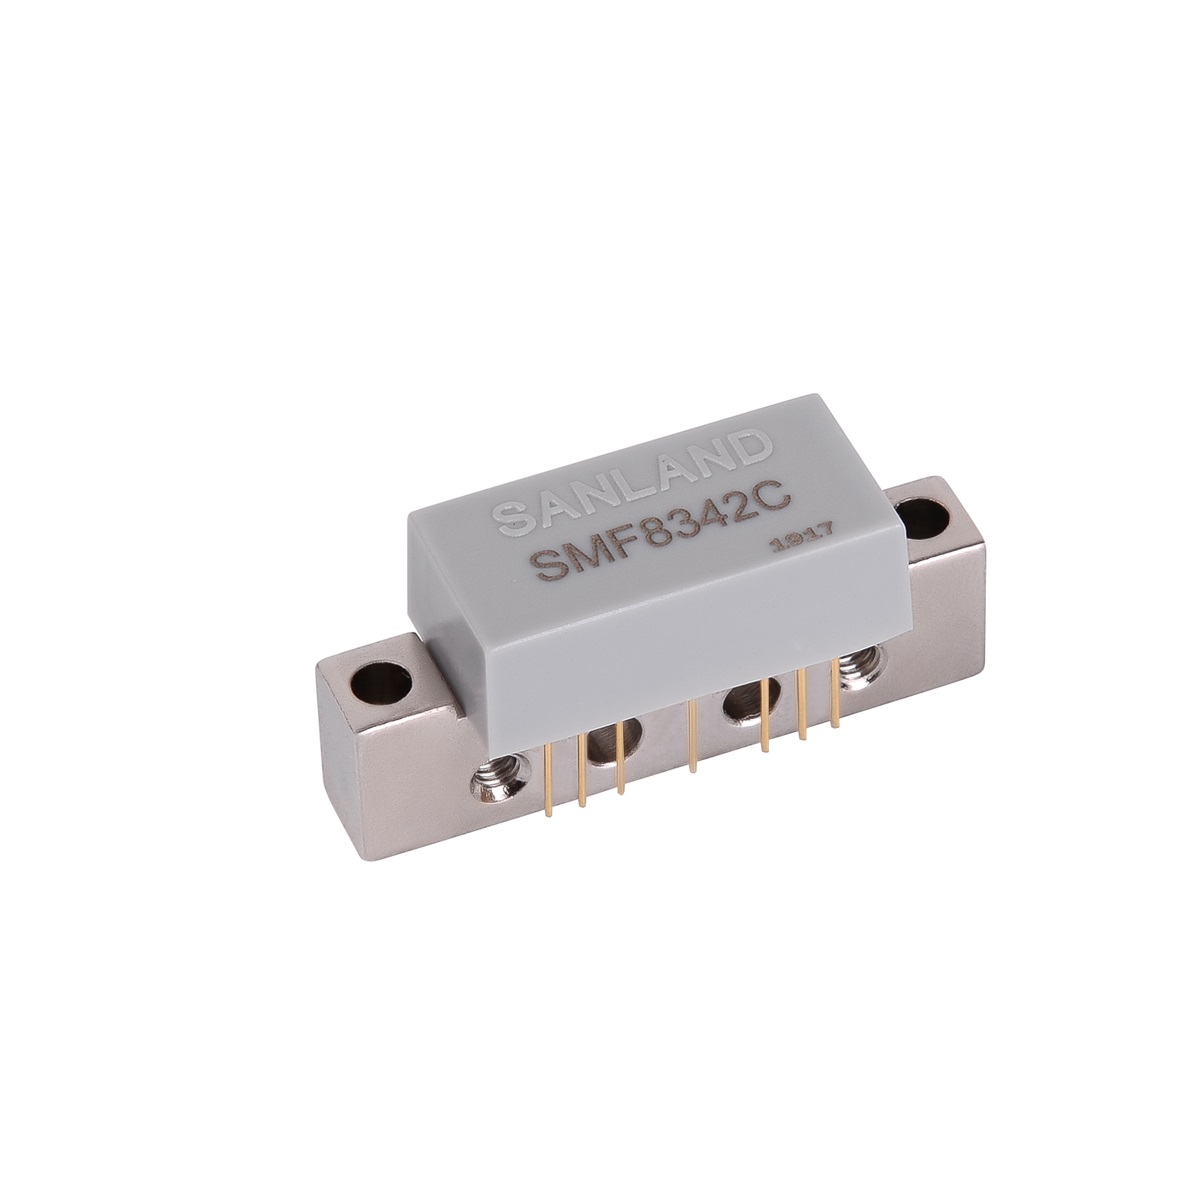 The SMF8342C is a Push Pull amplifier module.